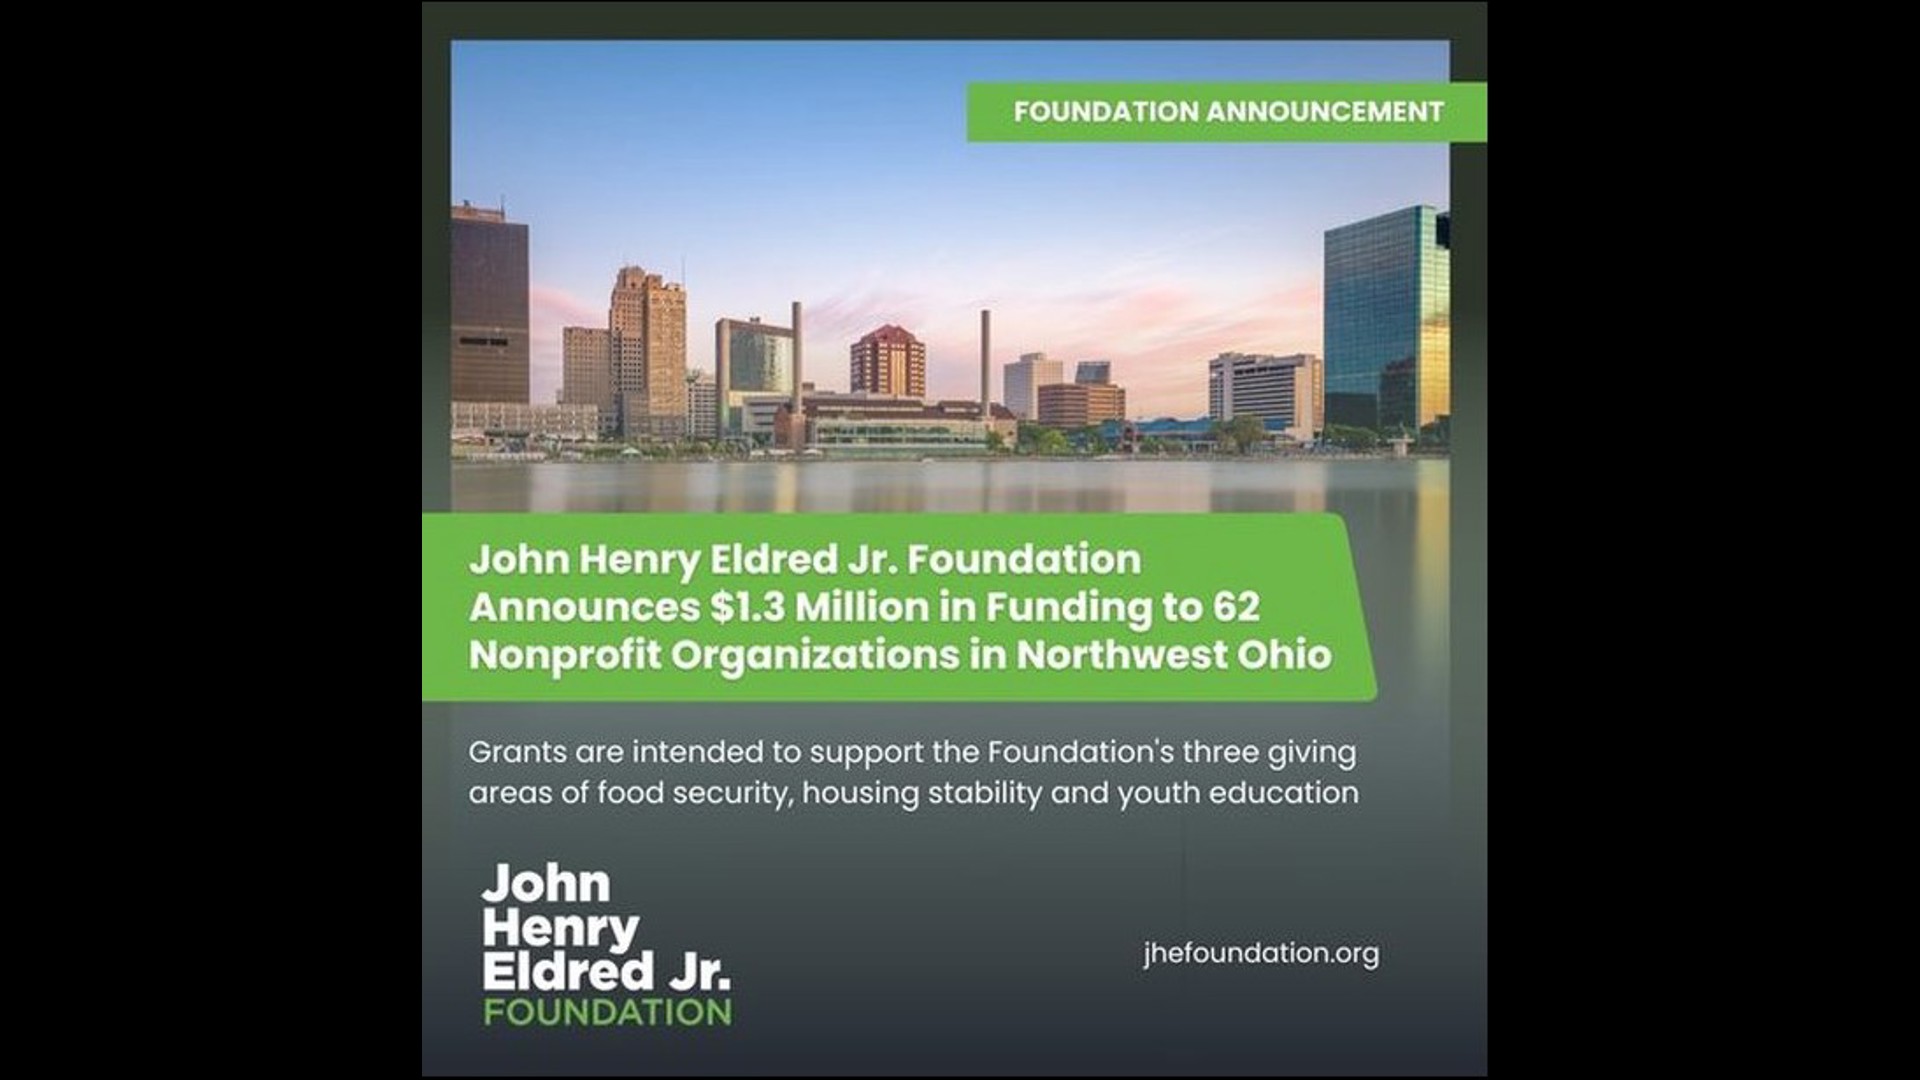 The foundation chose 62 nonprofit organizations in northwest Ohio to receive the grants in support of food security, housing stability and youth education.